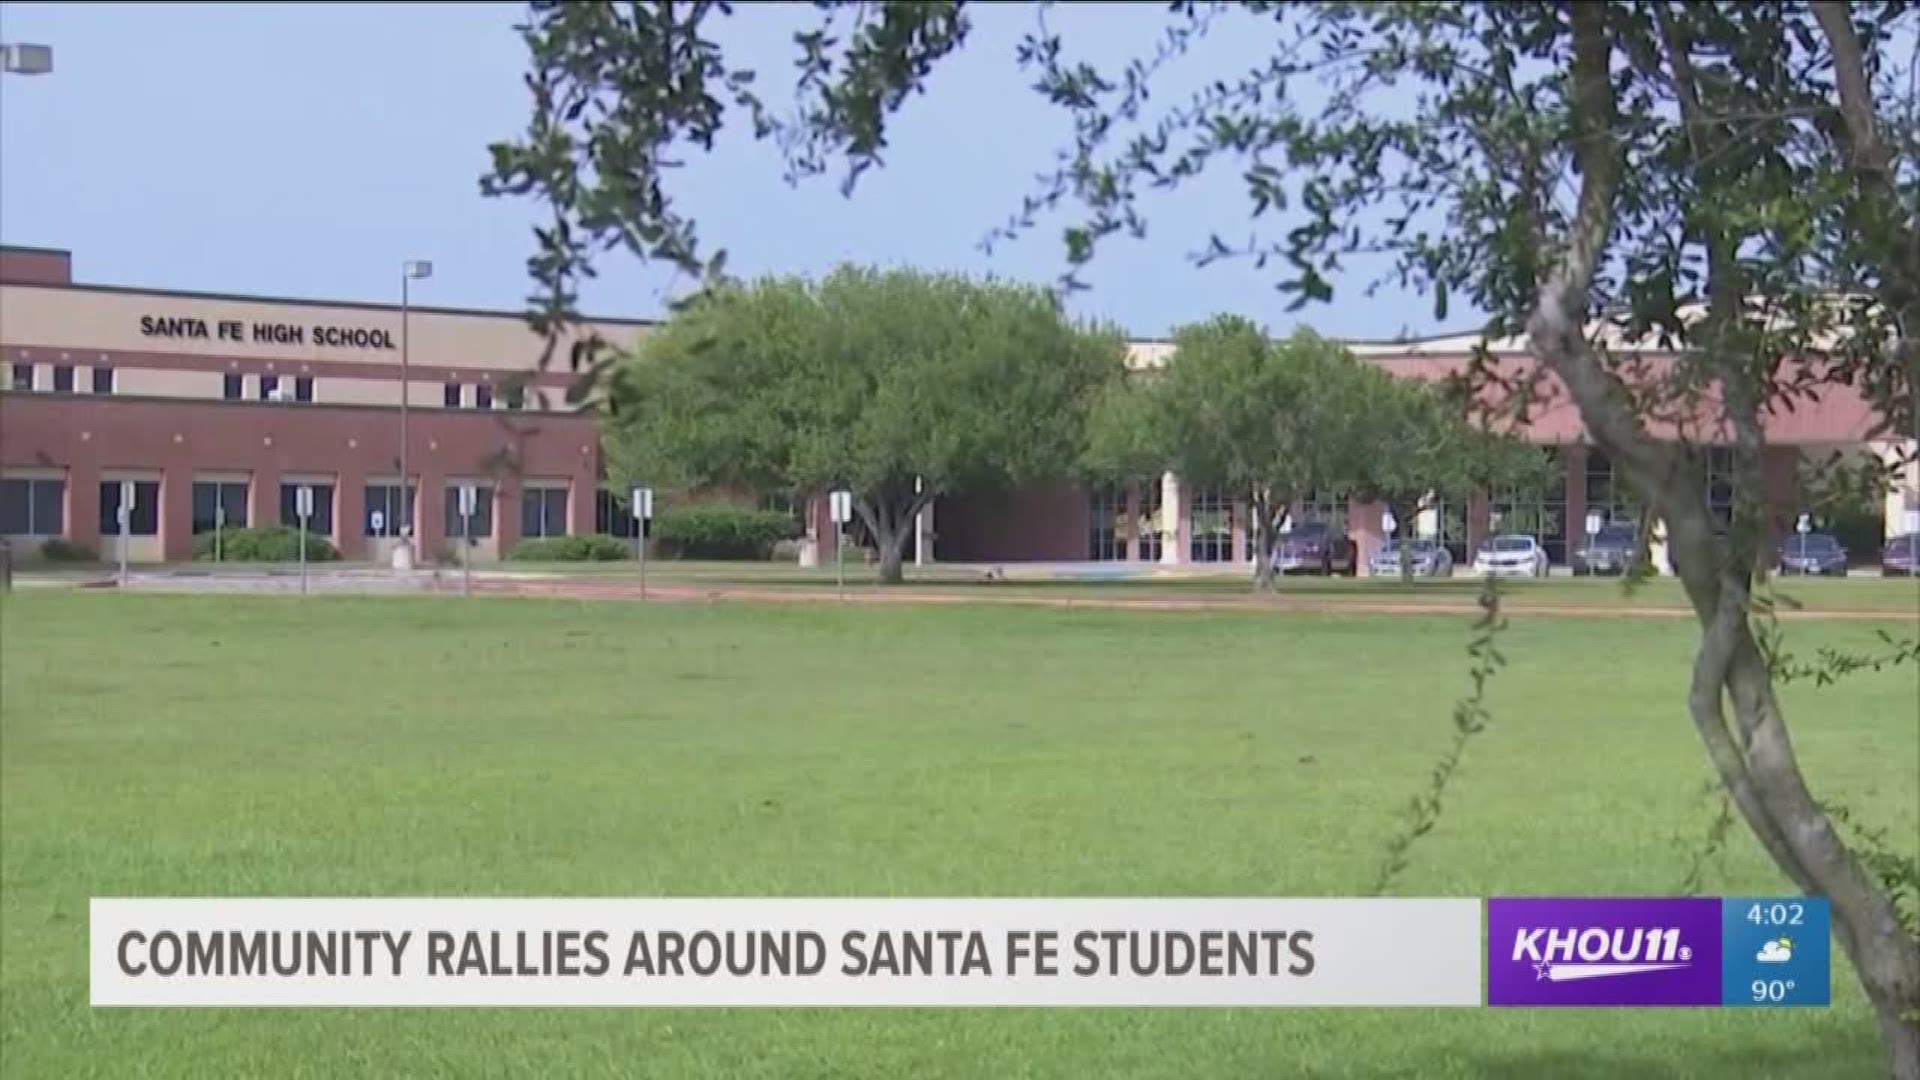 It was an emotional morning, as Santa Fe High School students went back to school early Monday. A steady stream of cars could be seen, as parents dropped off their kids.